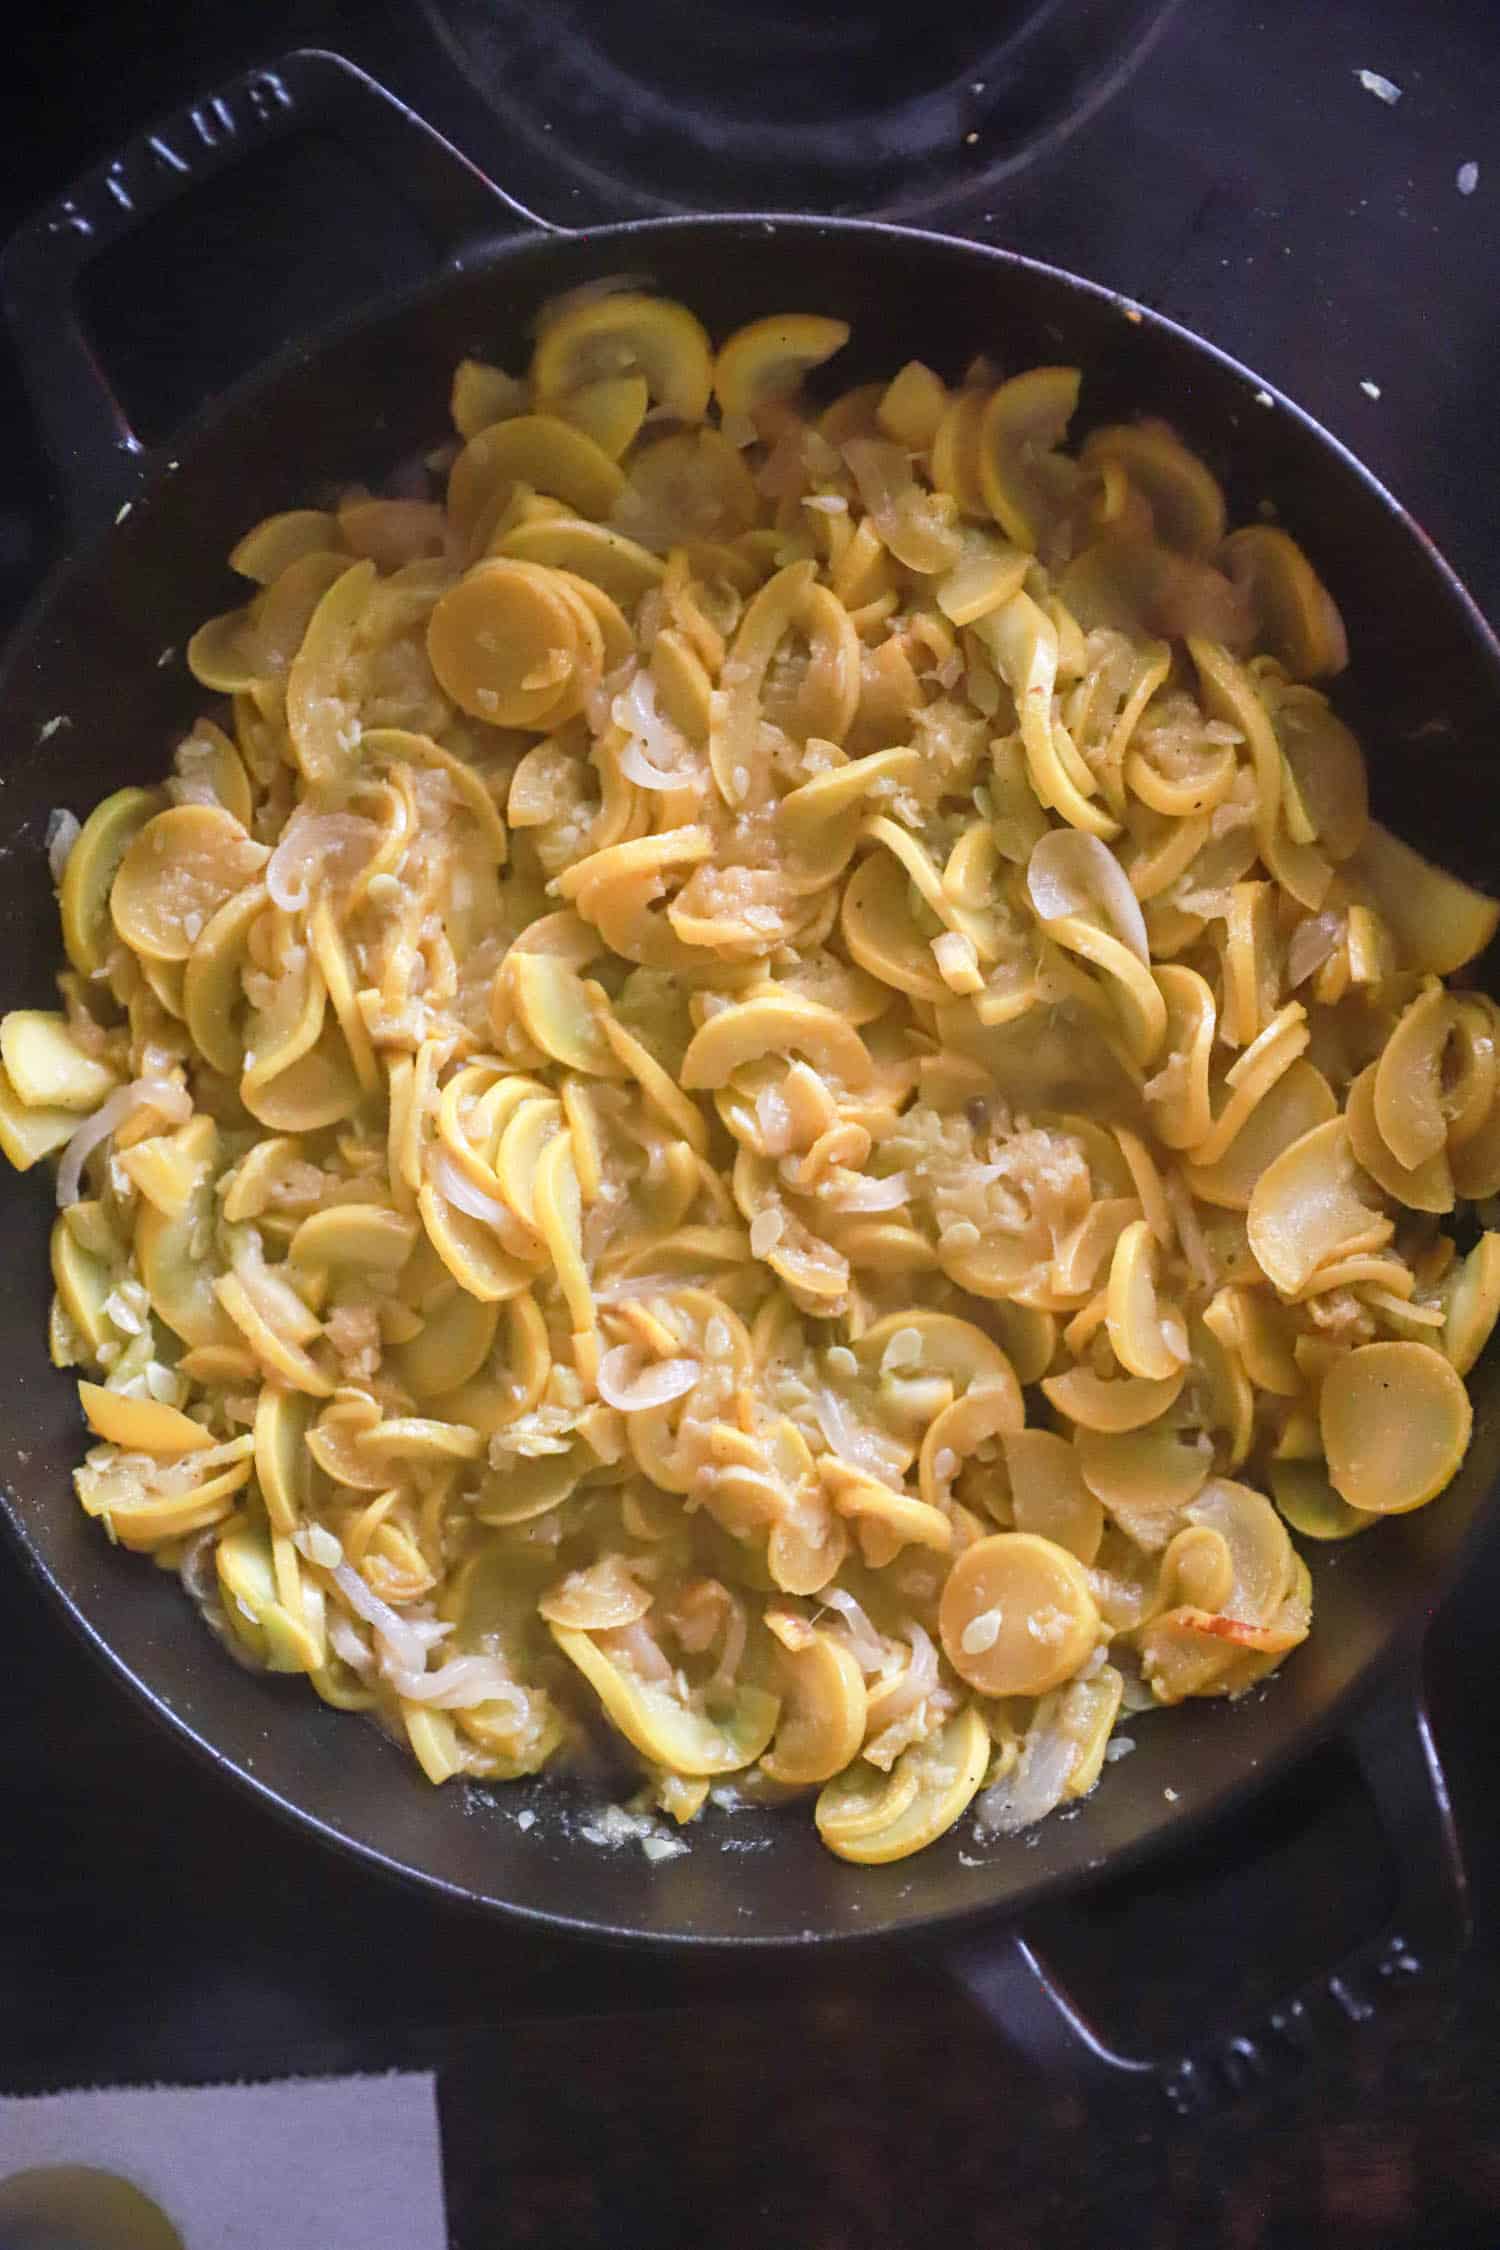 Sauteed squash and onions in large black skillet.